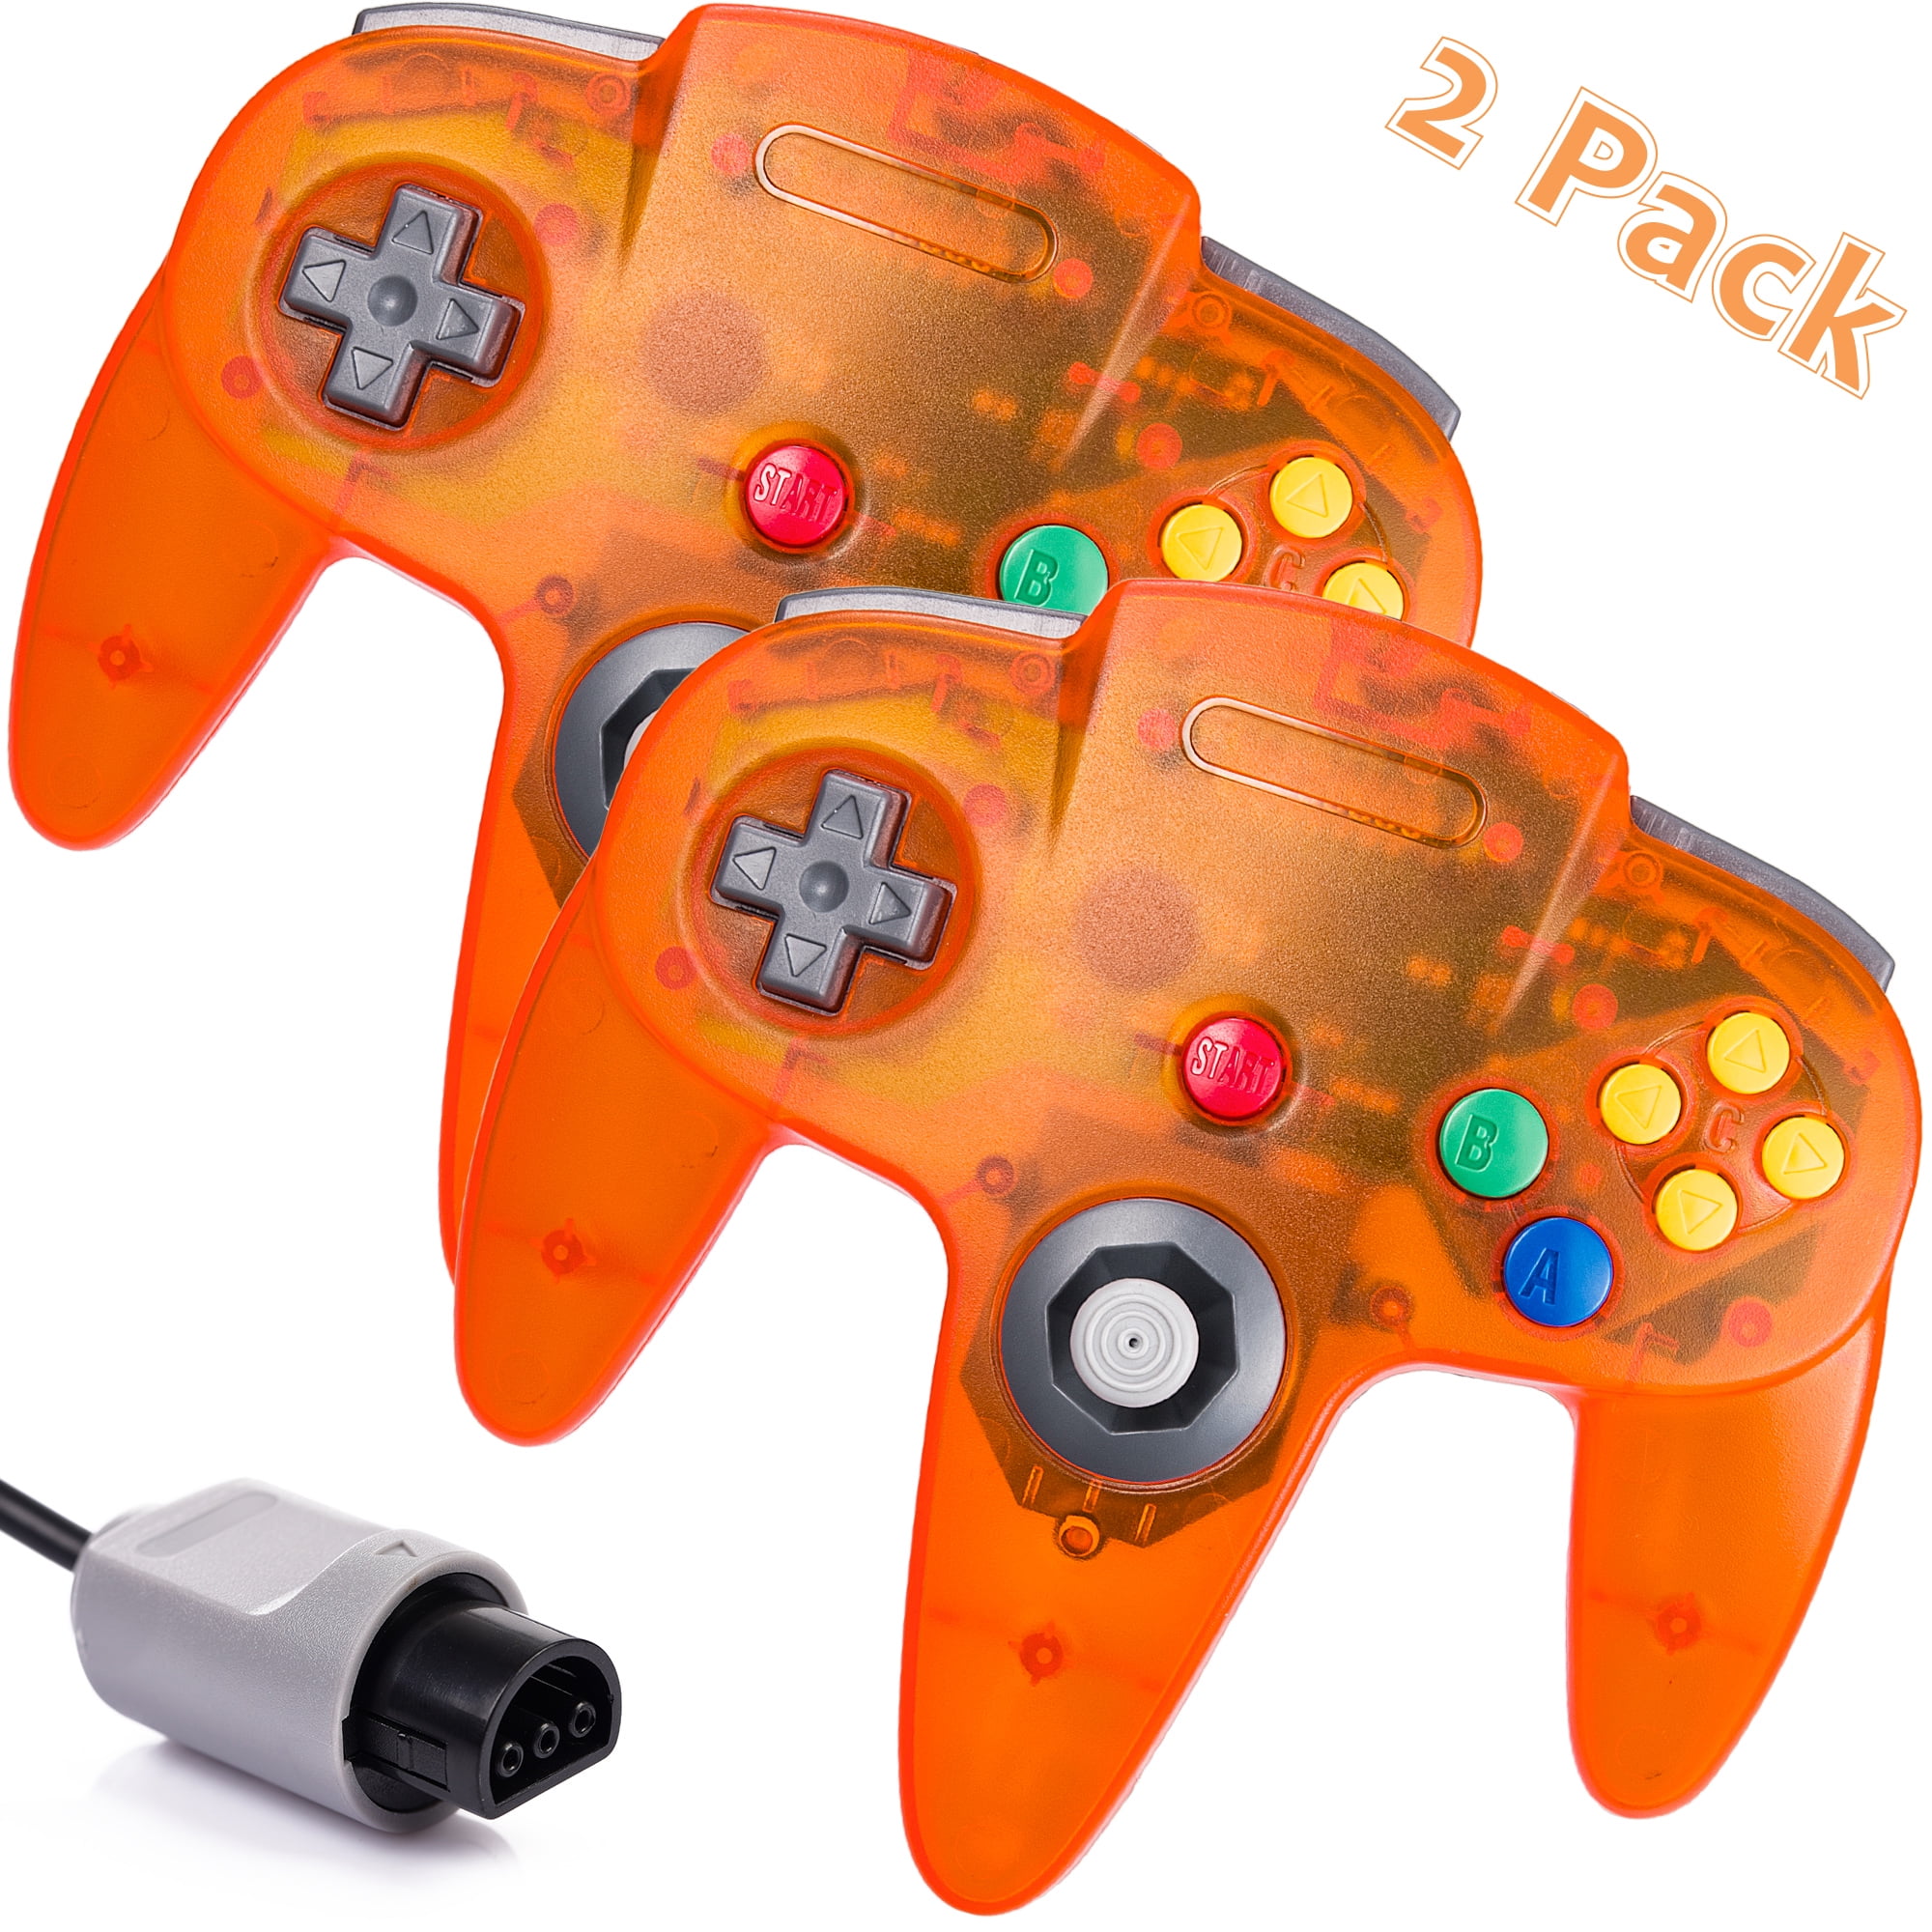 miadore Classic N64 Controller Joystick Remote for N64 Video Game System N64 Console-Clear Orange 